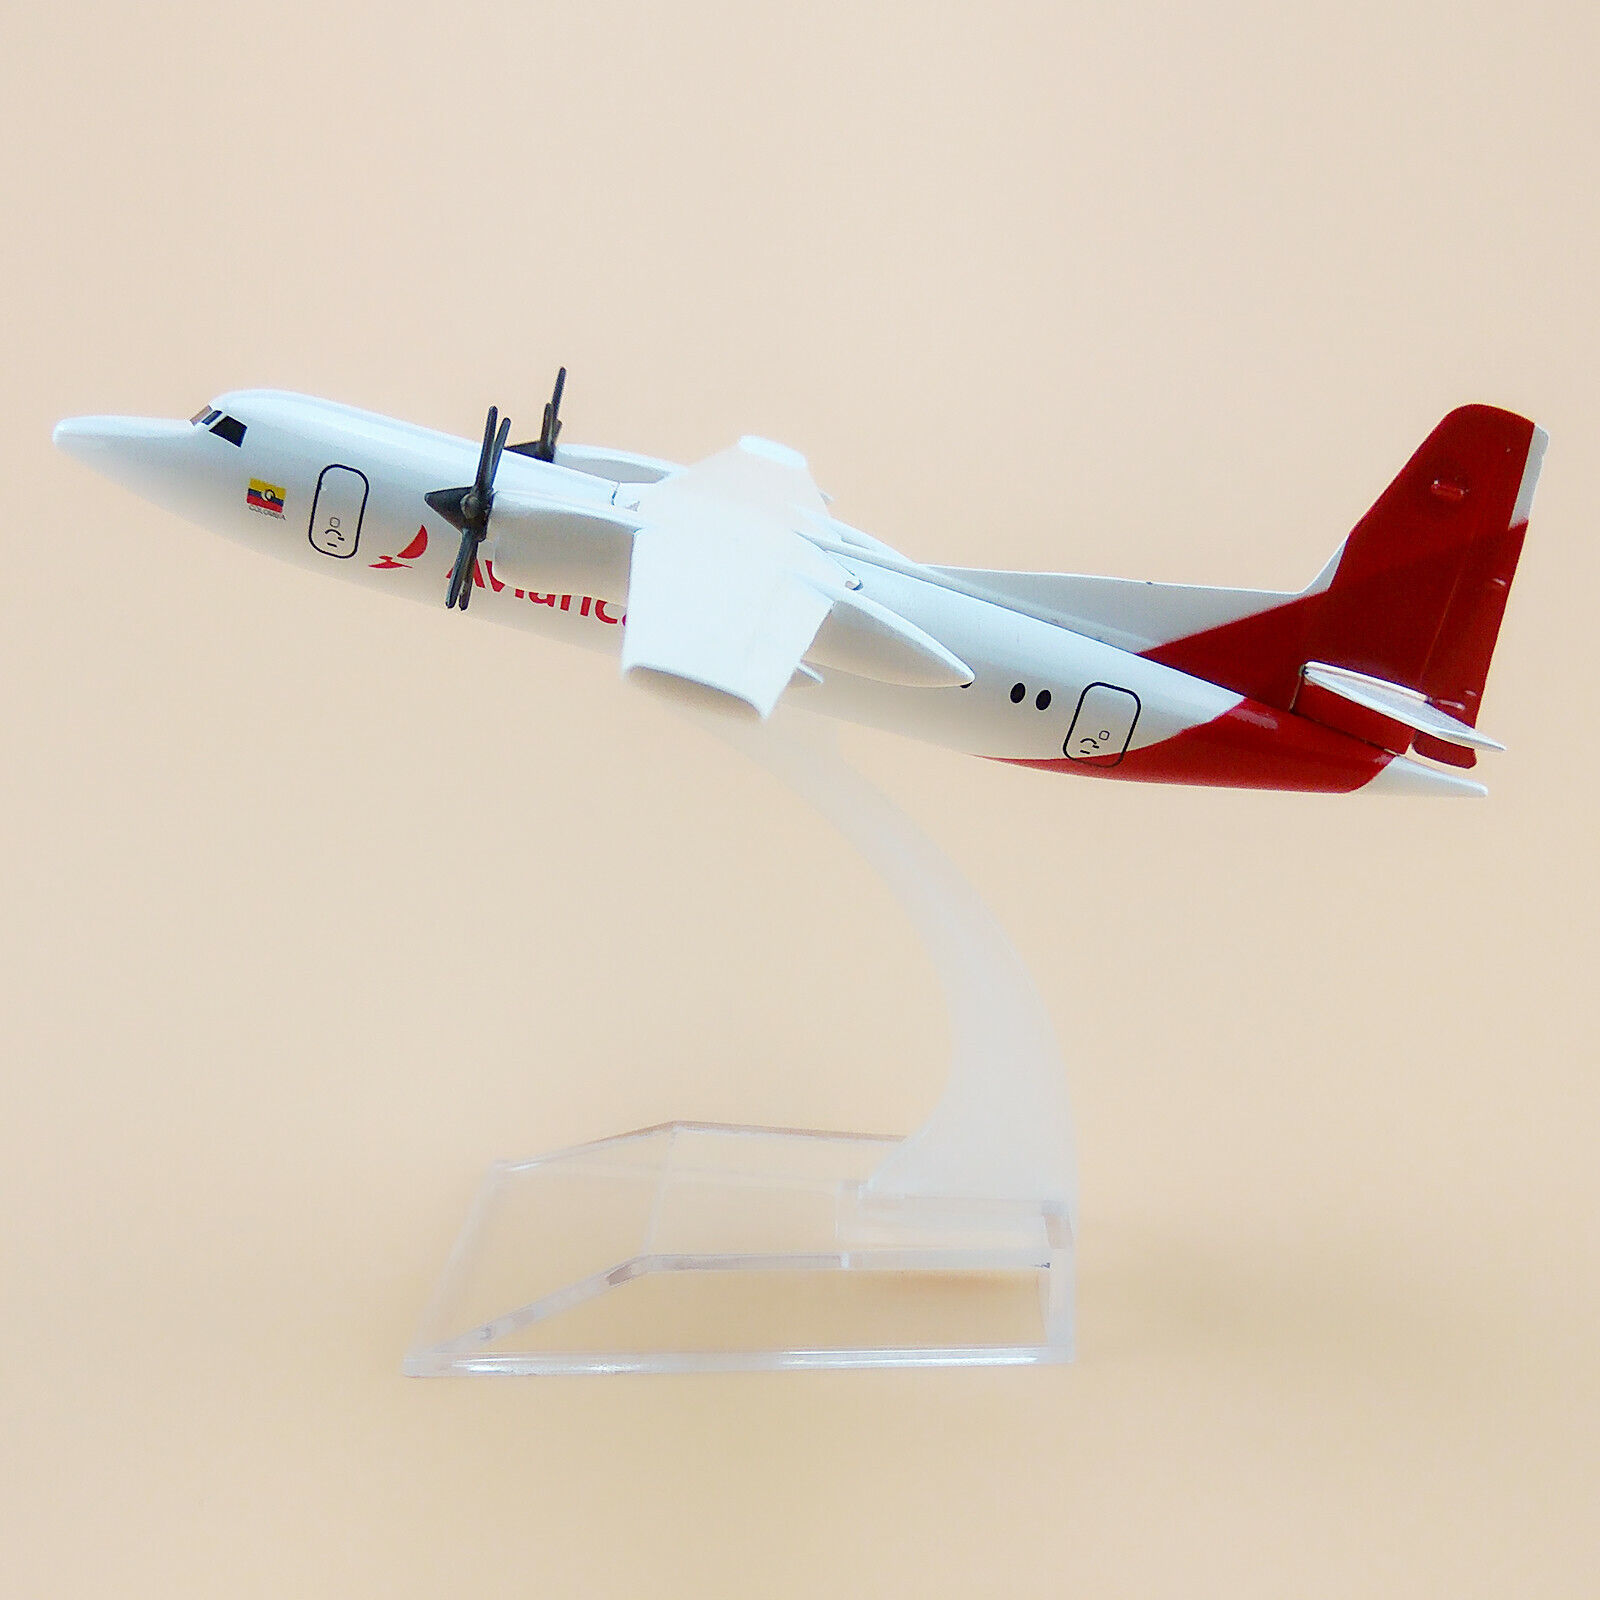 16cm Air AVIANCA Fokker F50 Airlines Airplane Model Plane Diecast Aircraft White